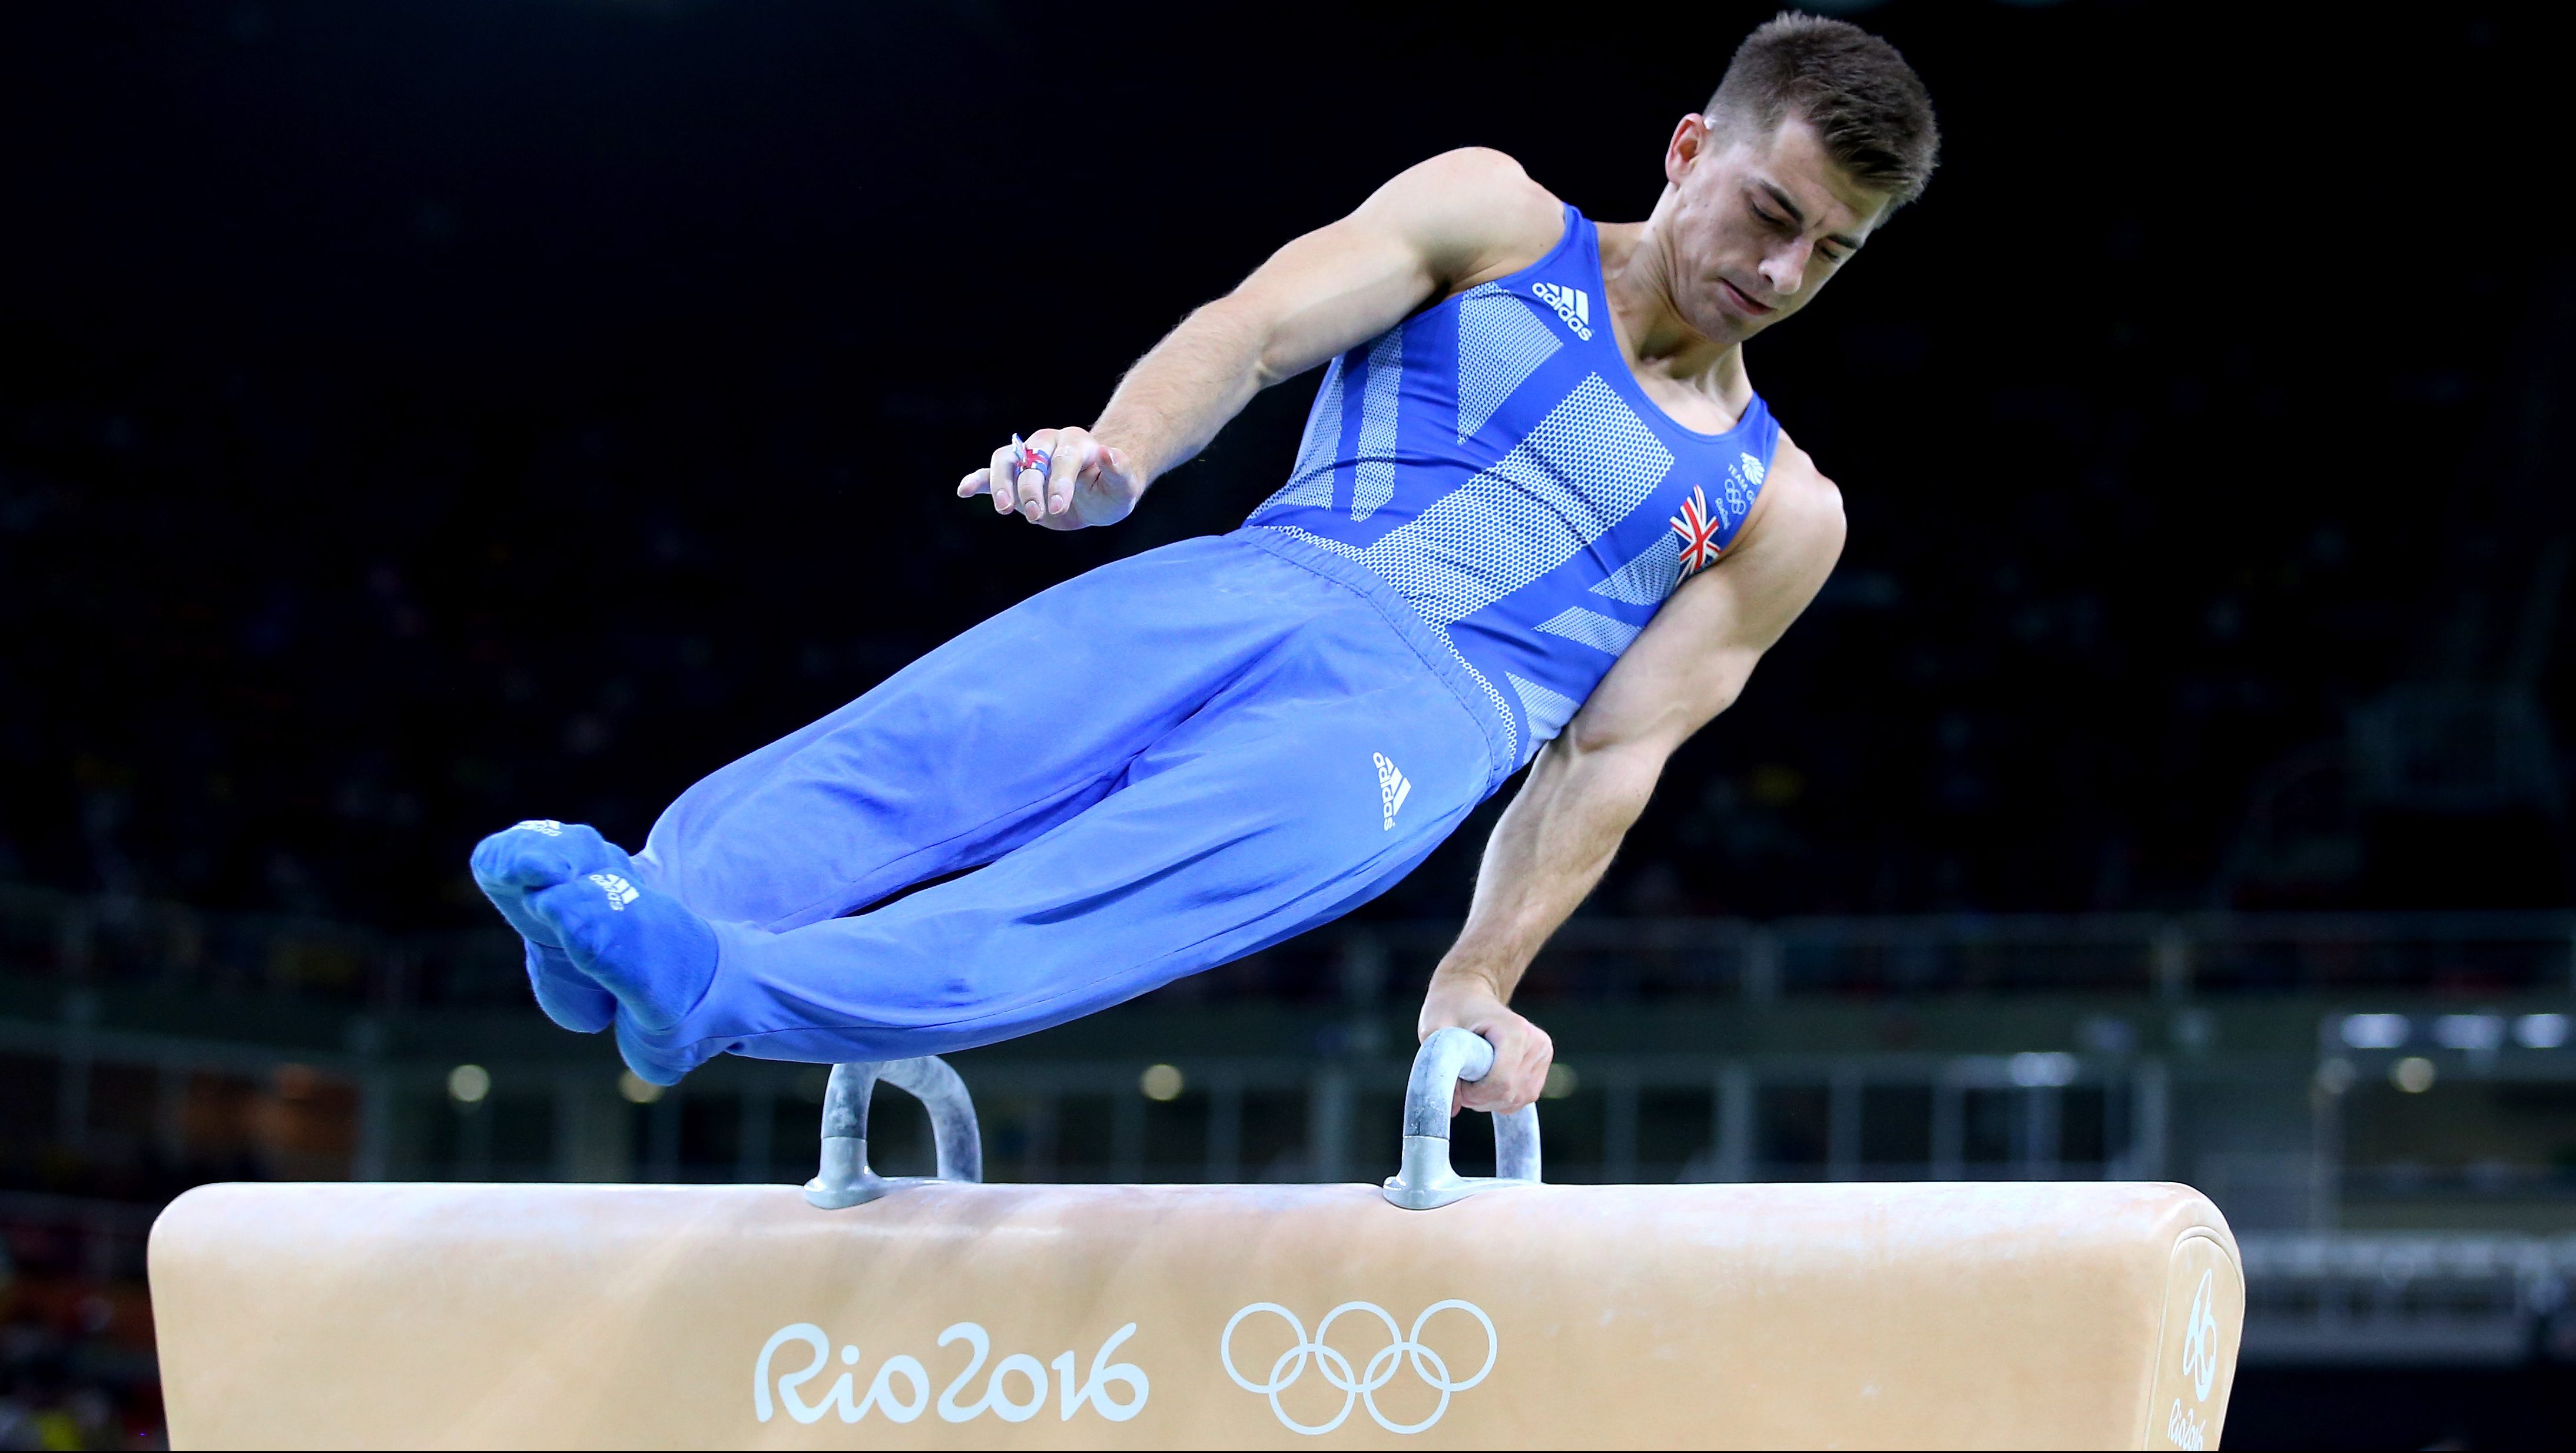 Men’s Olympic Gymnastics Team Finals, Rio Olympics Who’s Competing